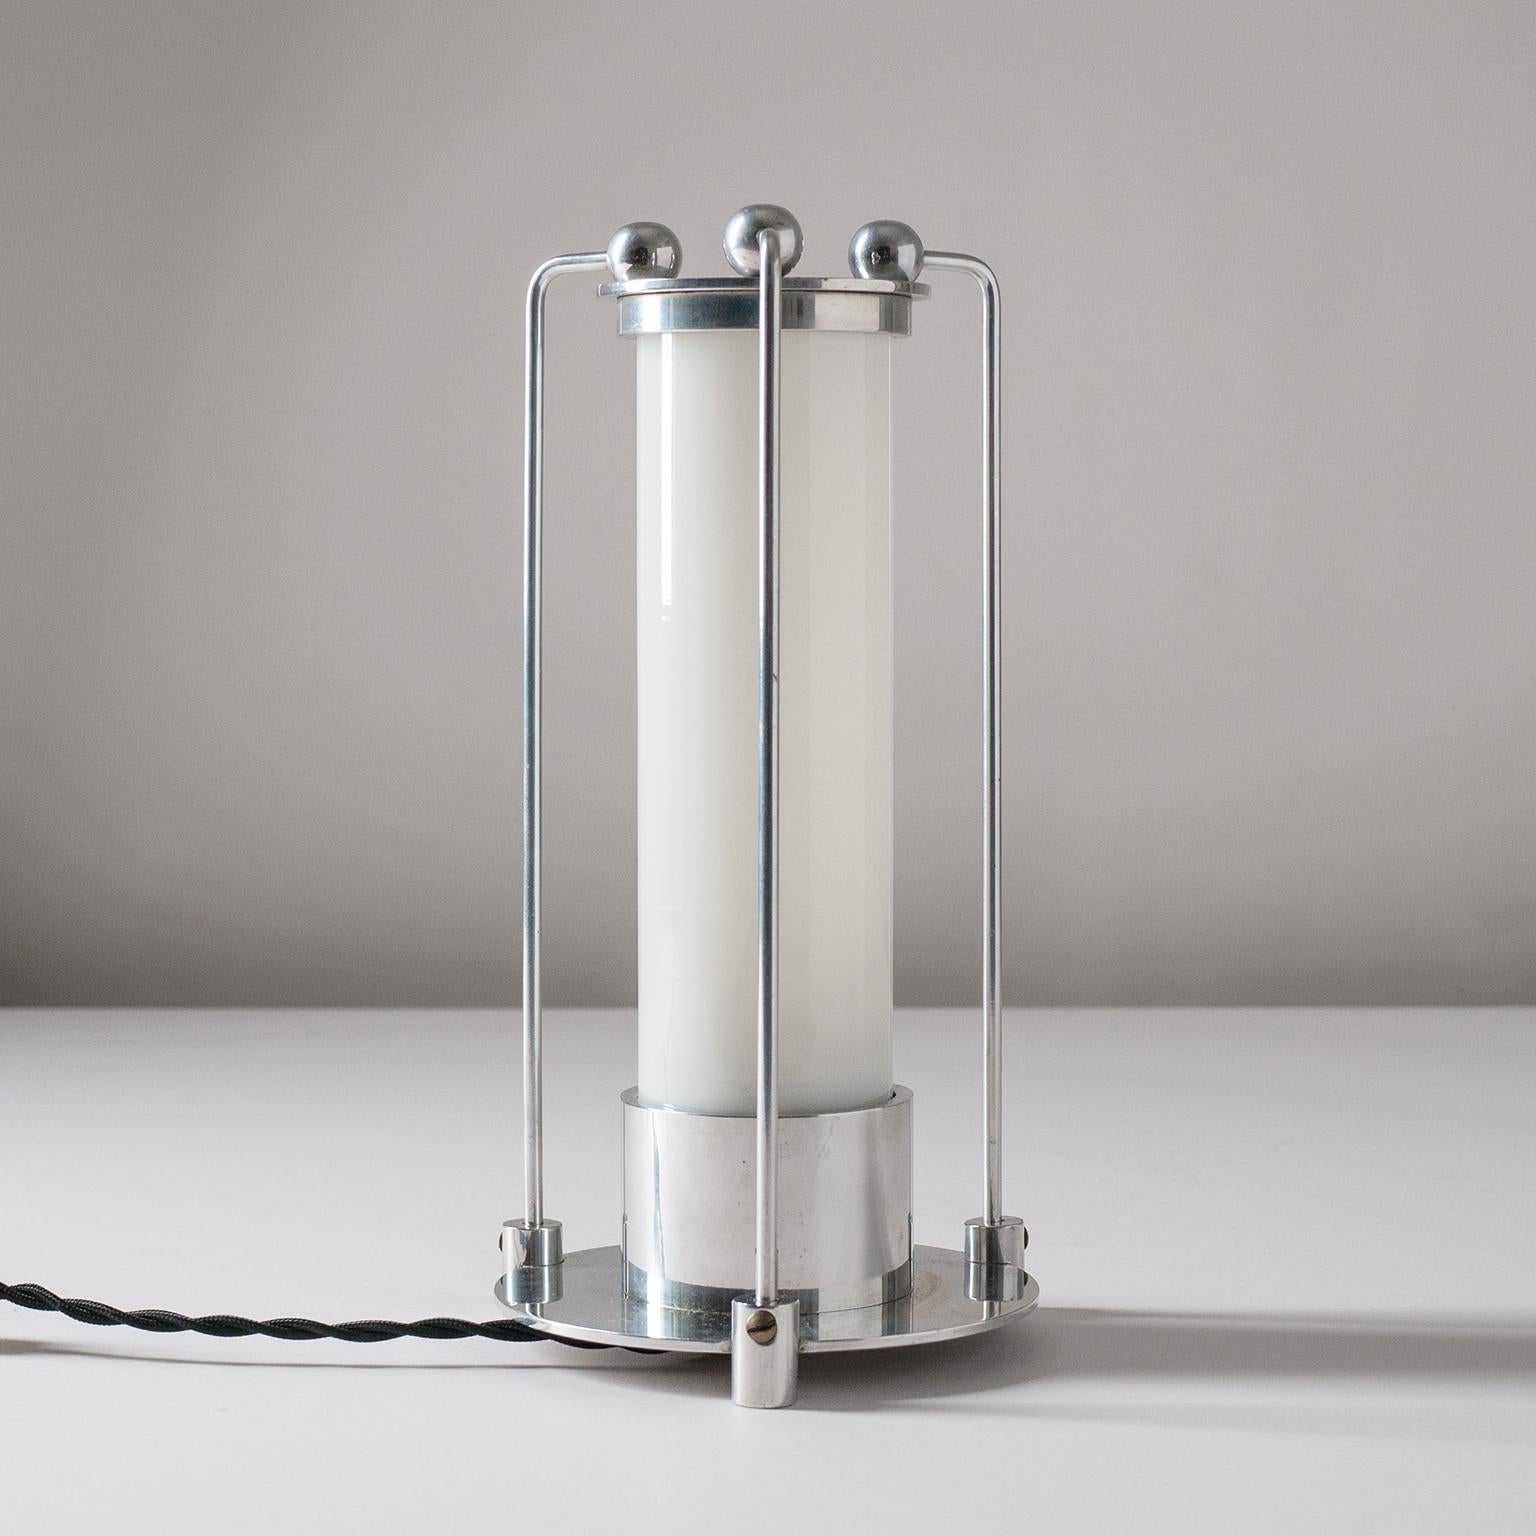 Rare Art Deco table lamp, from the 1930s. Very unique Minimalist, Bauhaus-influenced, design with a polished aluminum body construction and a blown opaline or milk glass tube. Very nice original condition with a light patina on the aluminum. One